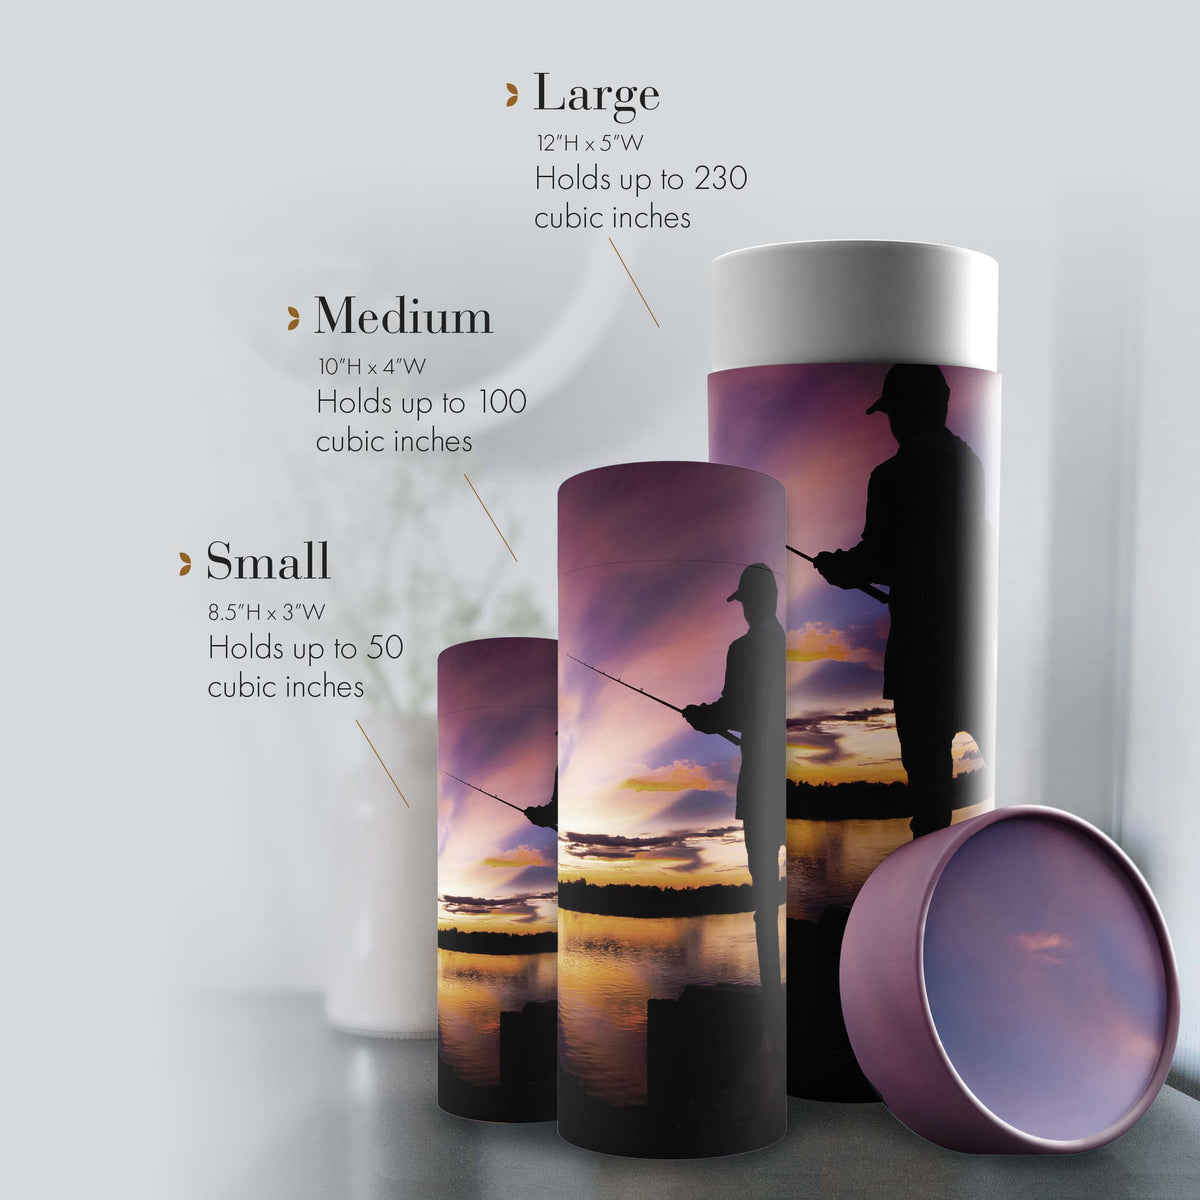 Commemorative Cremation Urns Gone Fishing Biodegradable &amp; Eco Friendly Burial or Scattering Urn / Tube